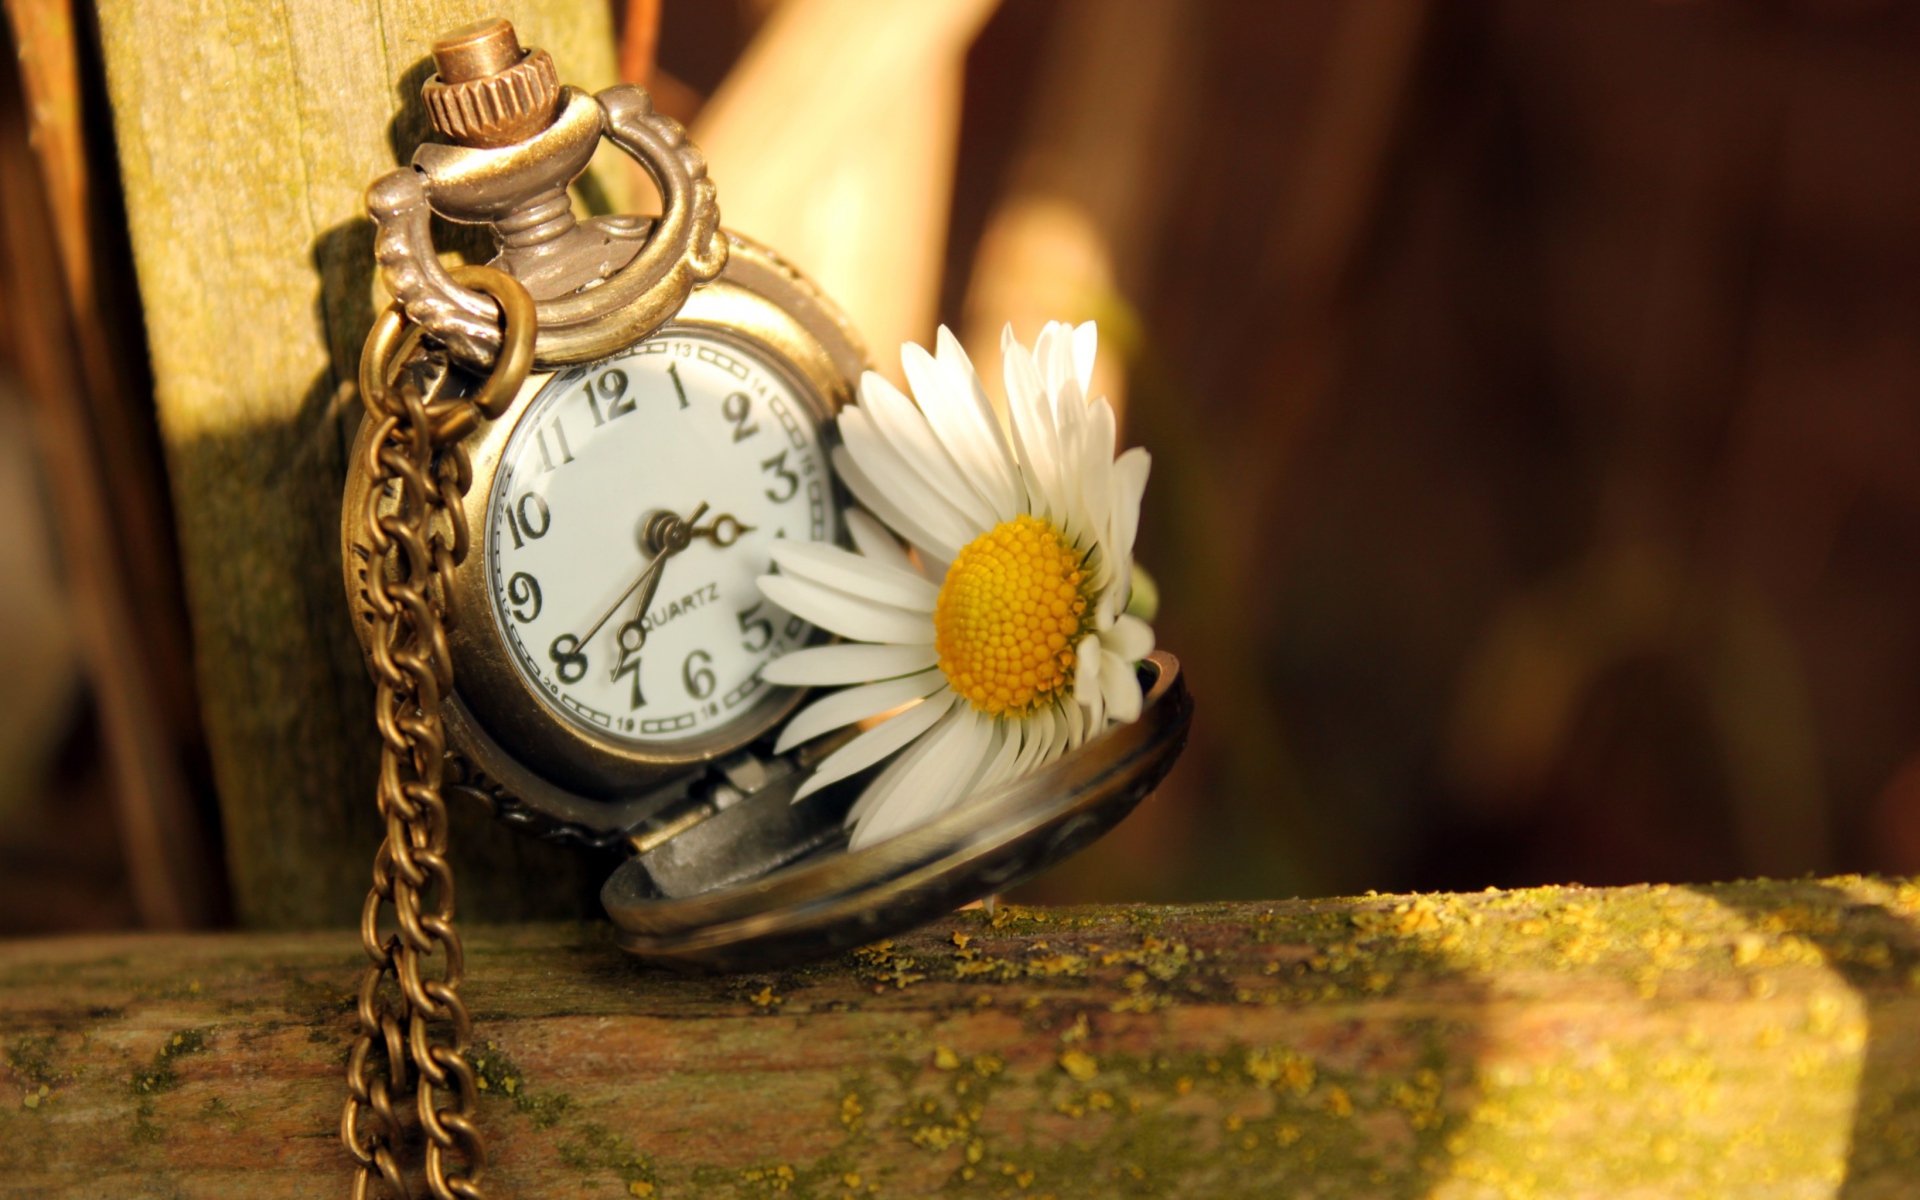 Vintage Watch And Daisy wallpaper 1920x1200